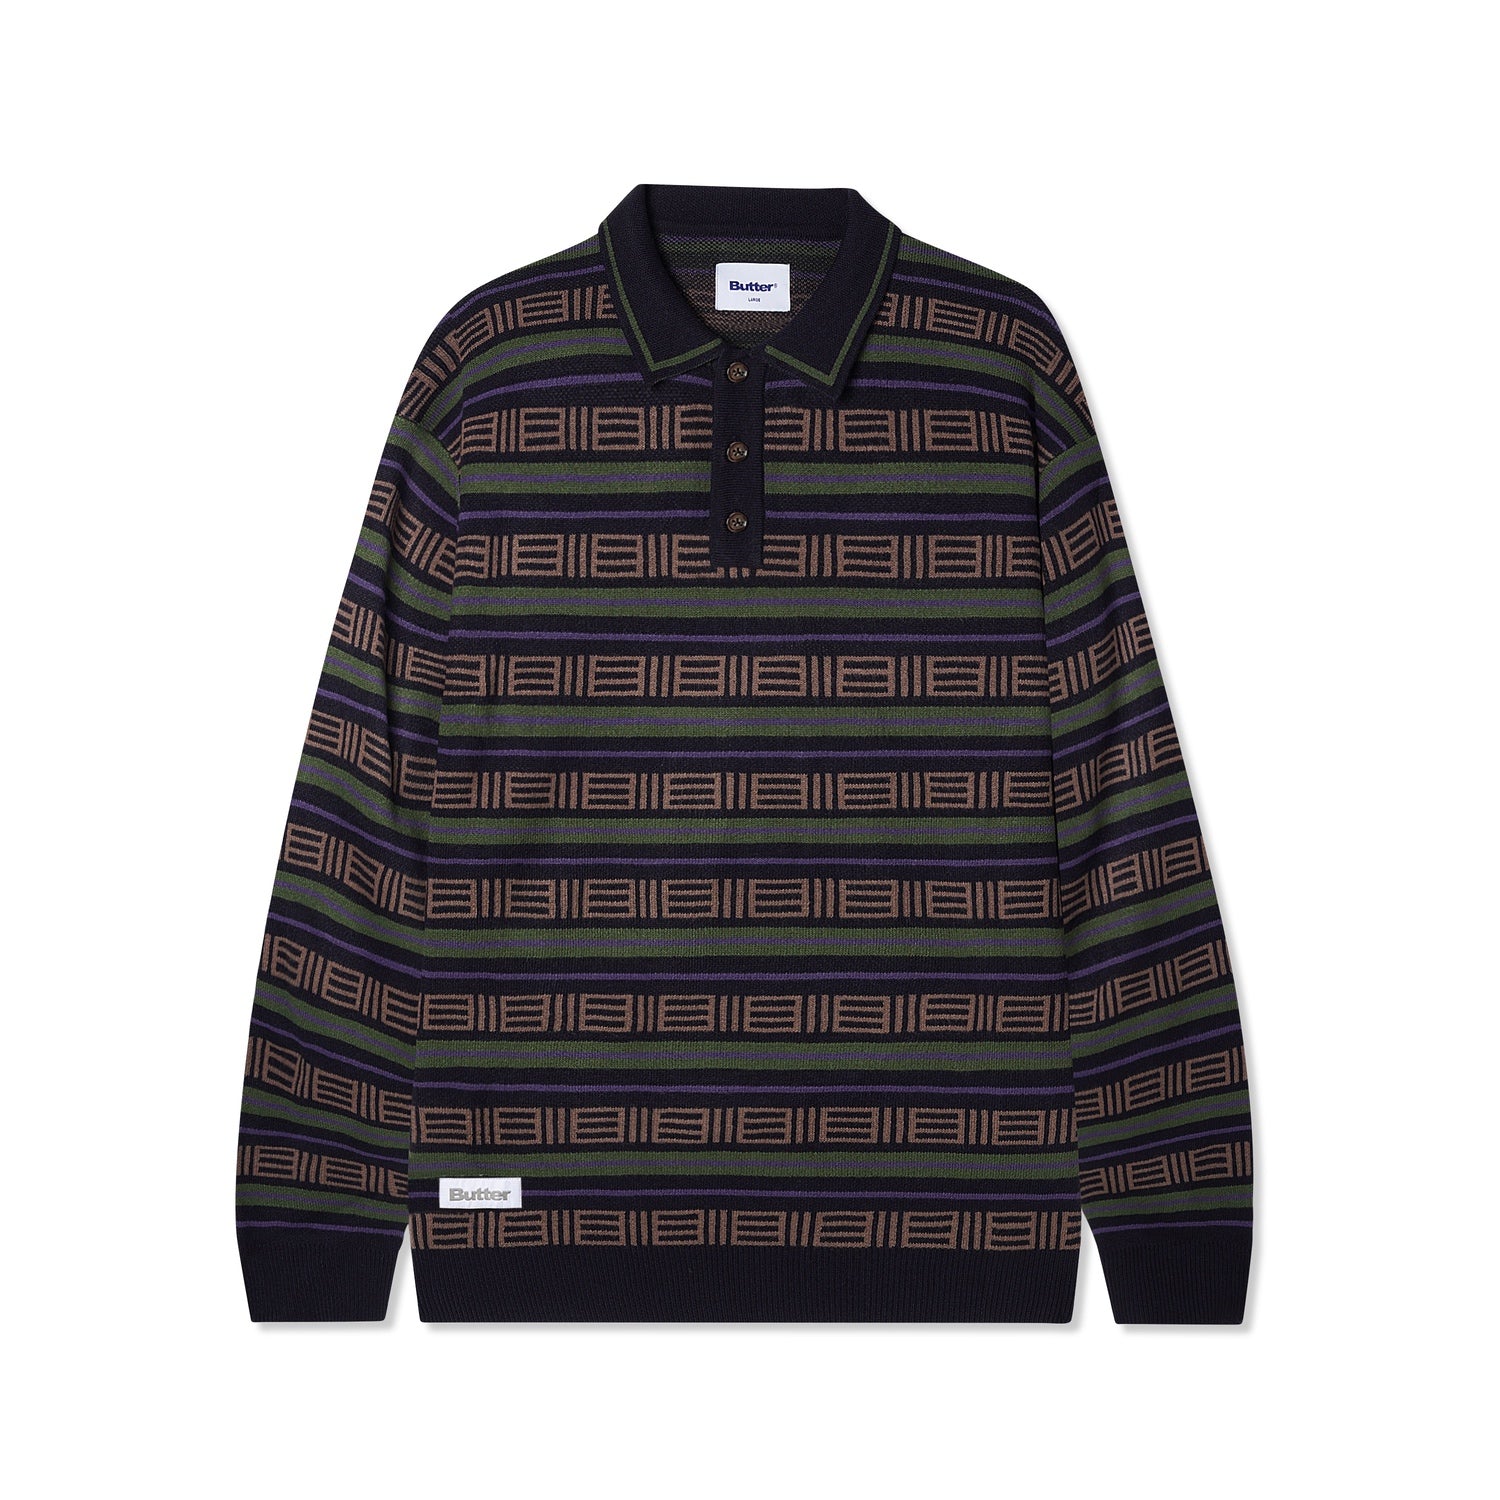 Butter Goods Windsor Knitted Sweater Navy / Forest